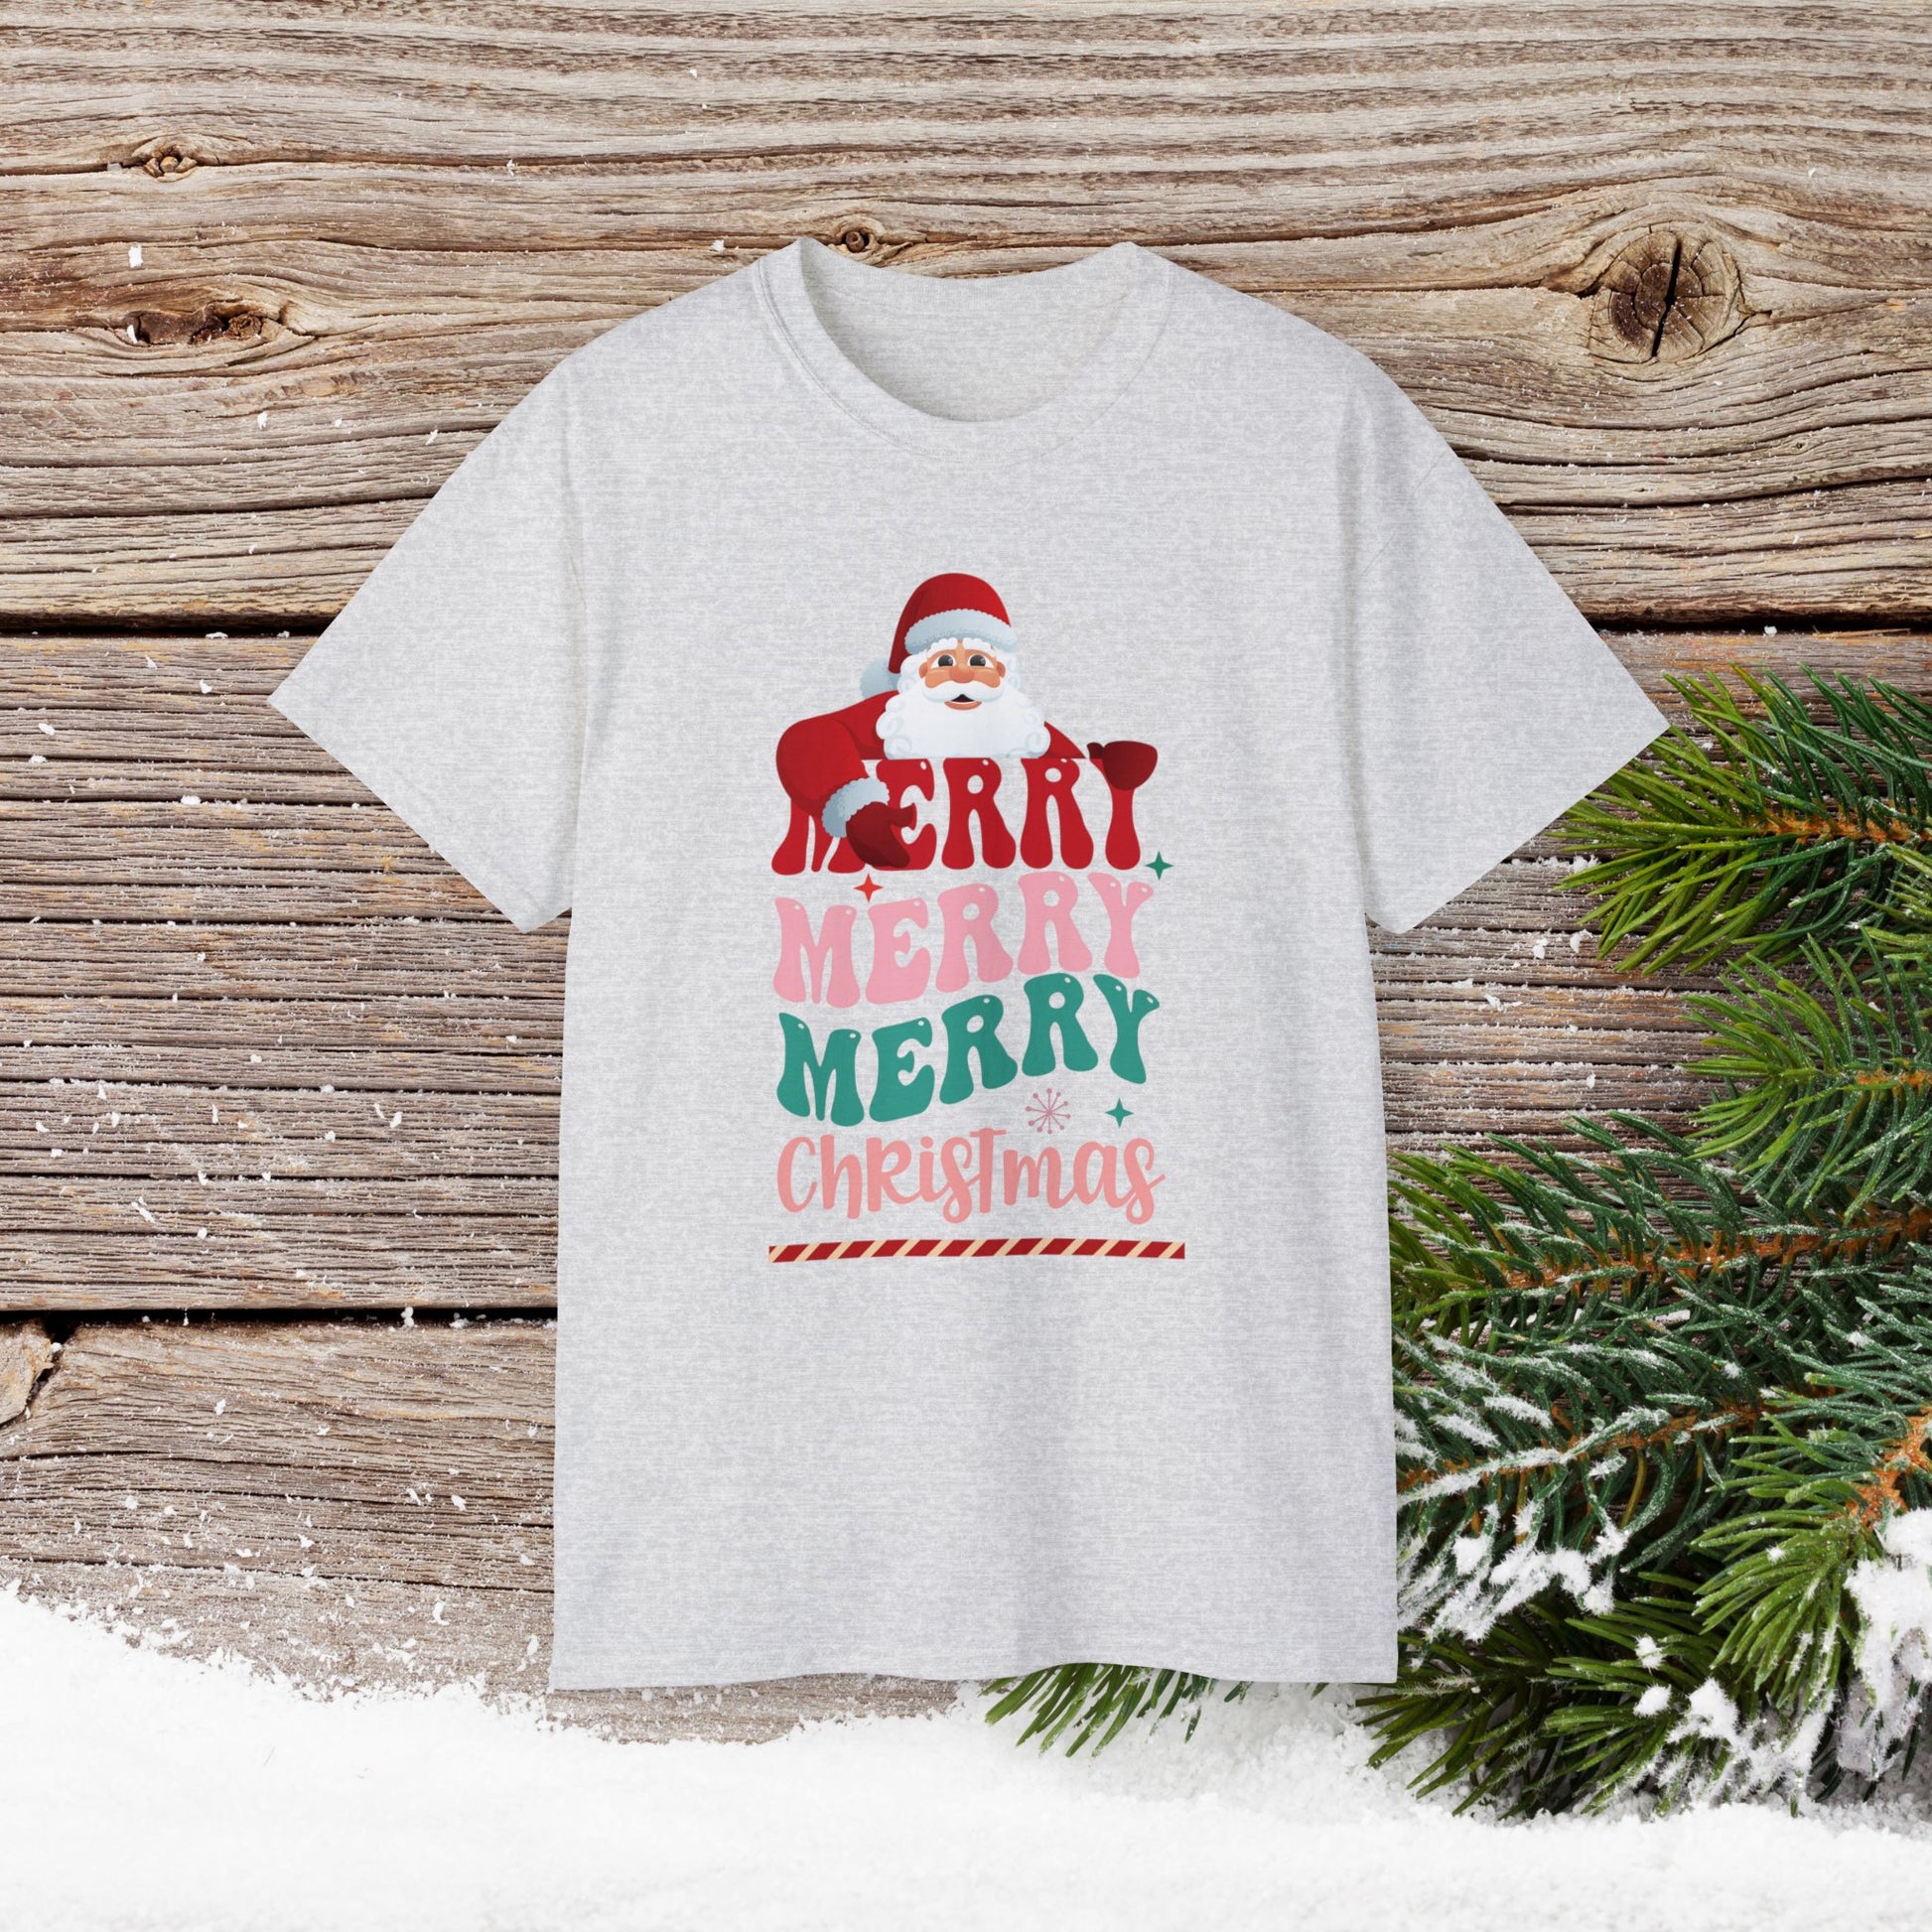 Christmas T-Shirt - Merry Merry Merry Christmas - Cute Christmas Shirts - Youth and Adult Christmas TShirts T-Shirts Graphic Avenue Light Gray Adult Small 